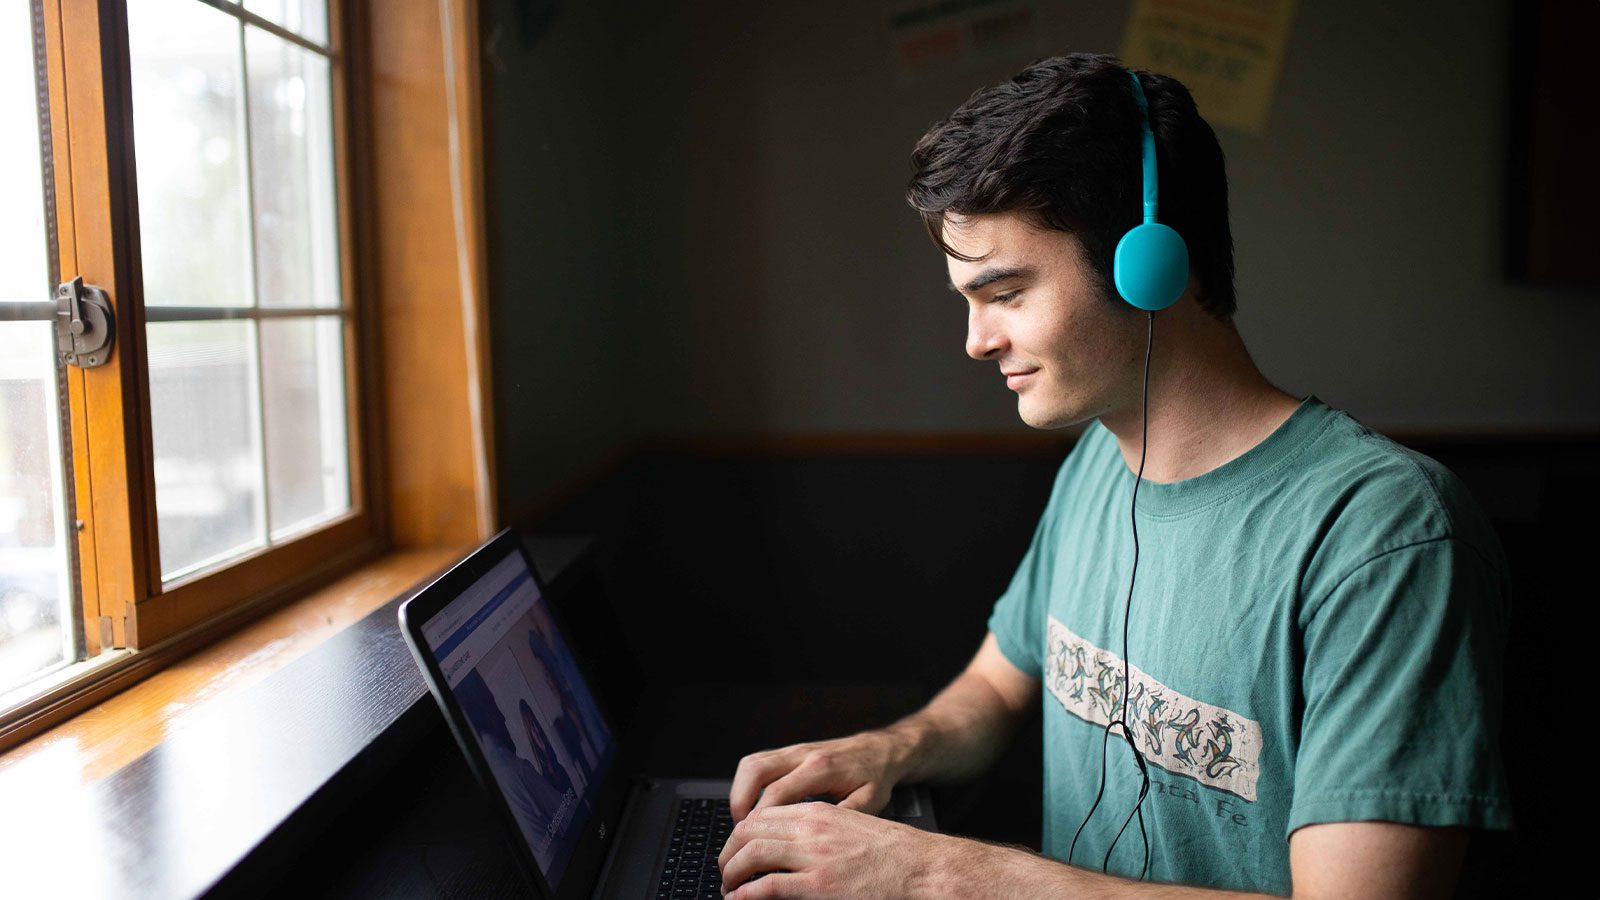 A young man with headphones working on a laptop by a window.